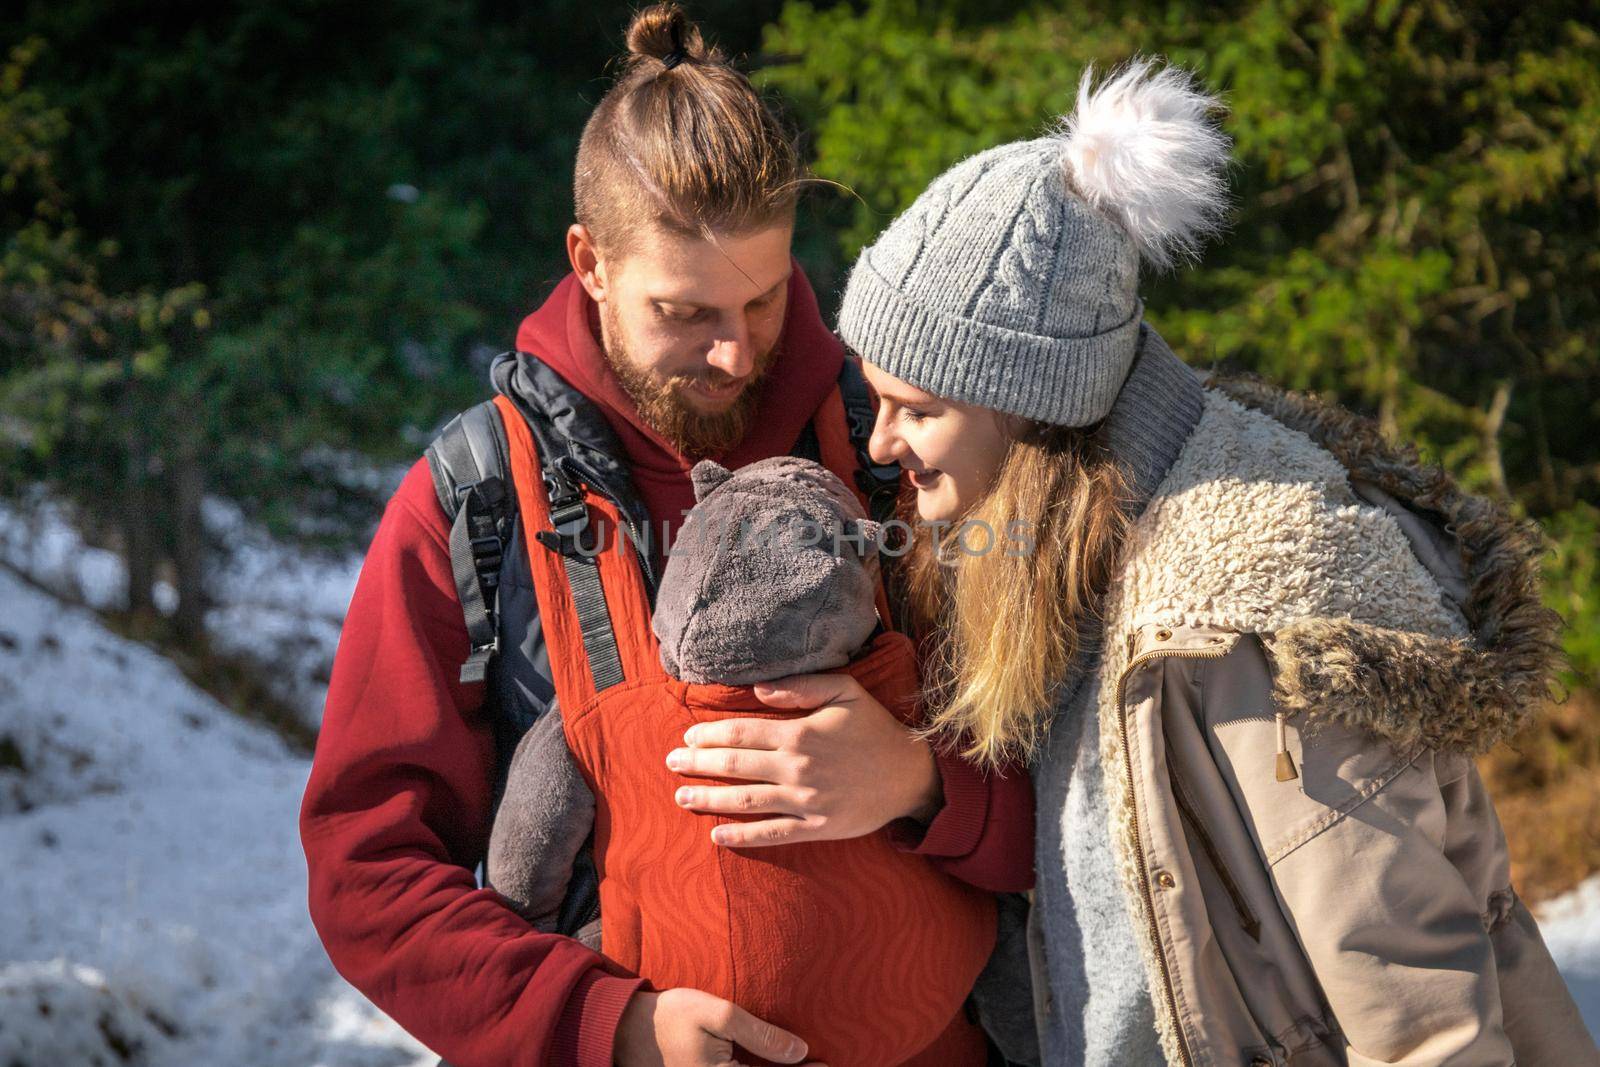 Babywearing young family winter hiking outdoor lifestyle.